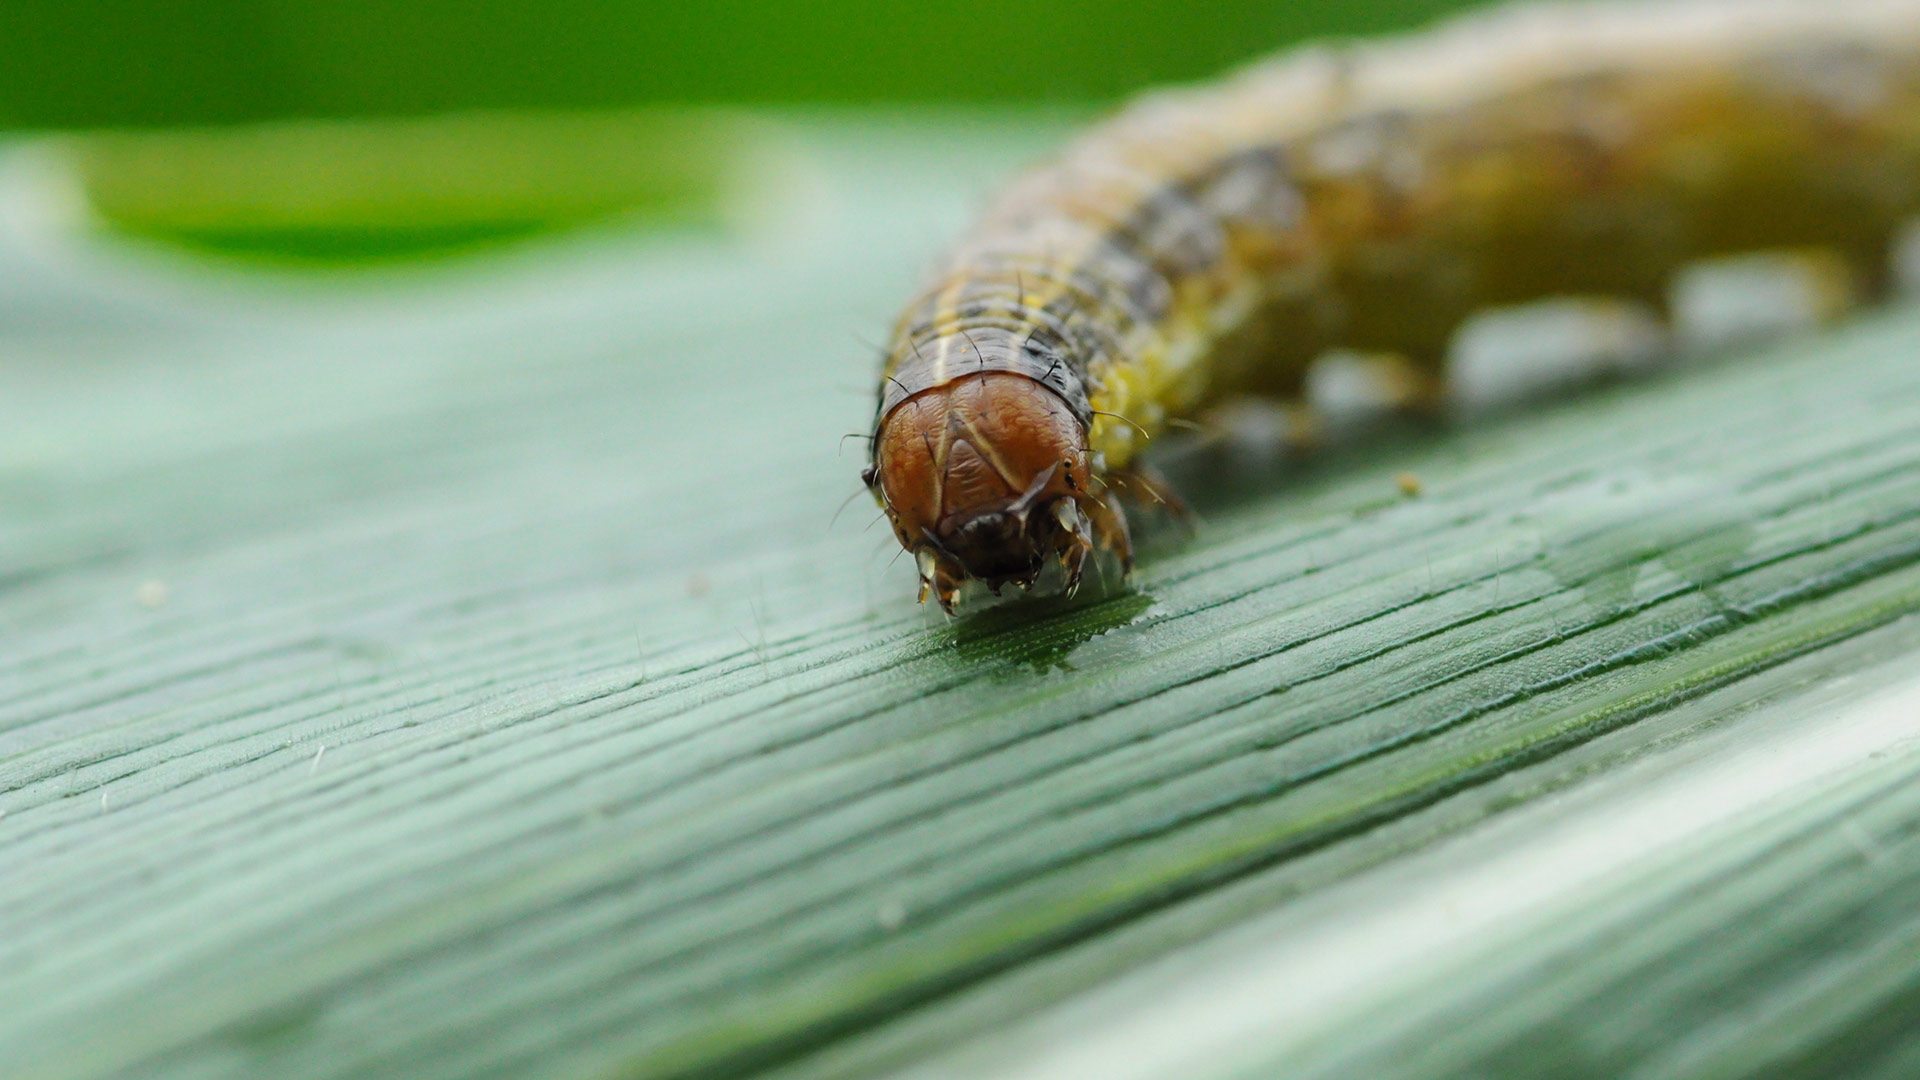 Is Your Lawn Infested With Armyworms? Here’s What to Do!